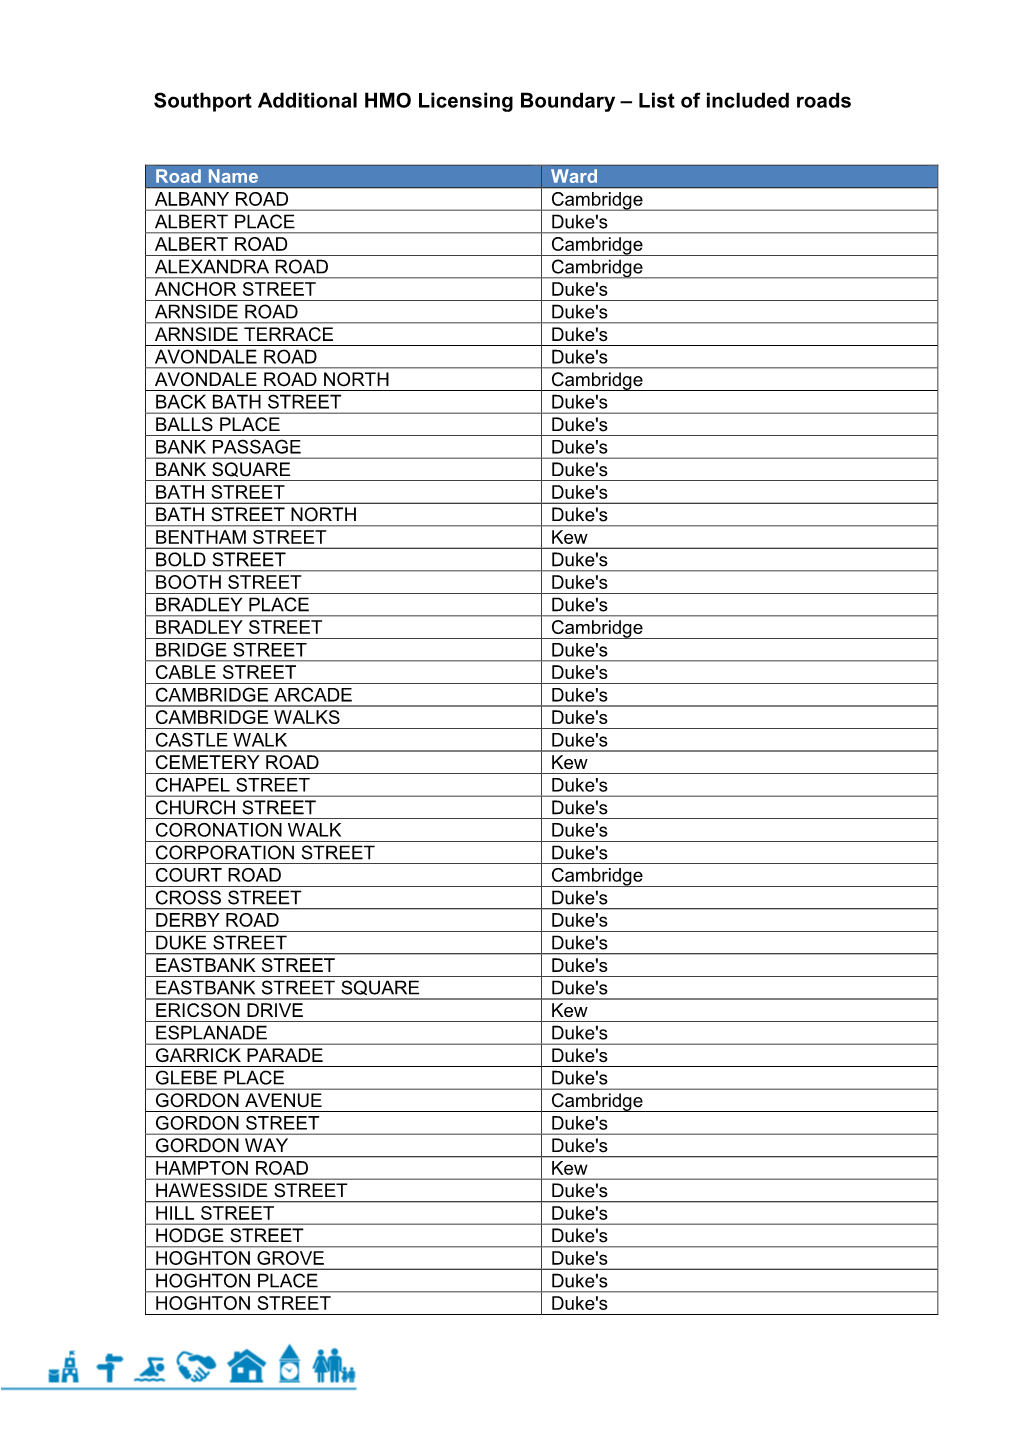 Southport Additional Licensing Area Road List